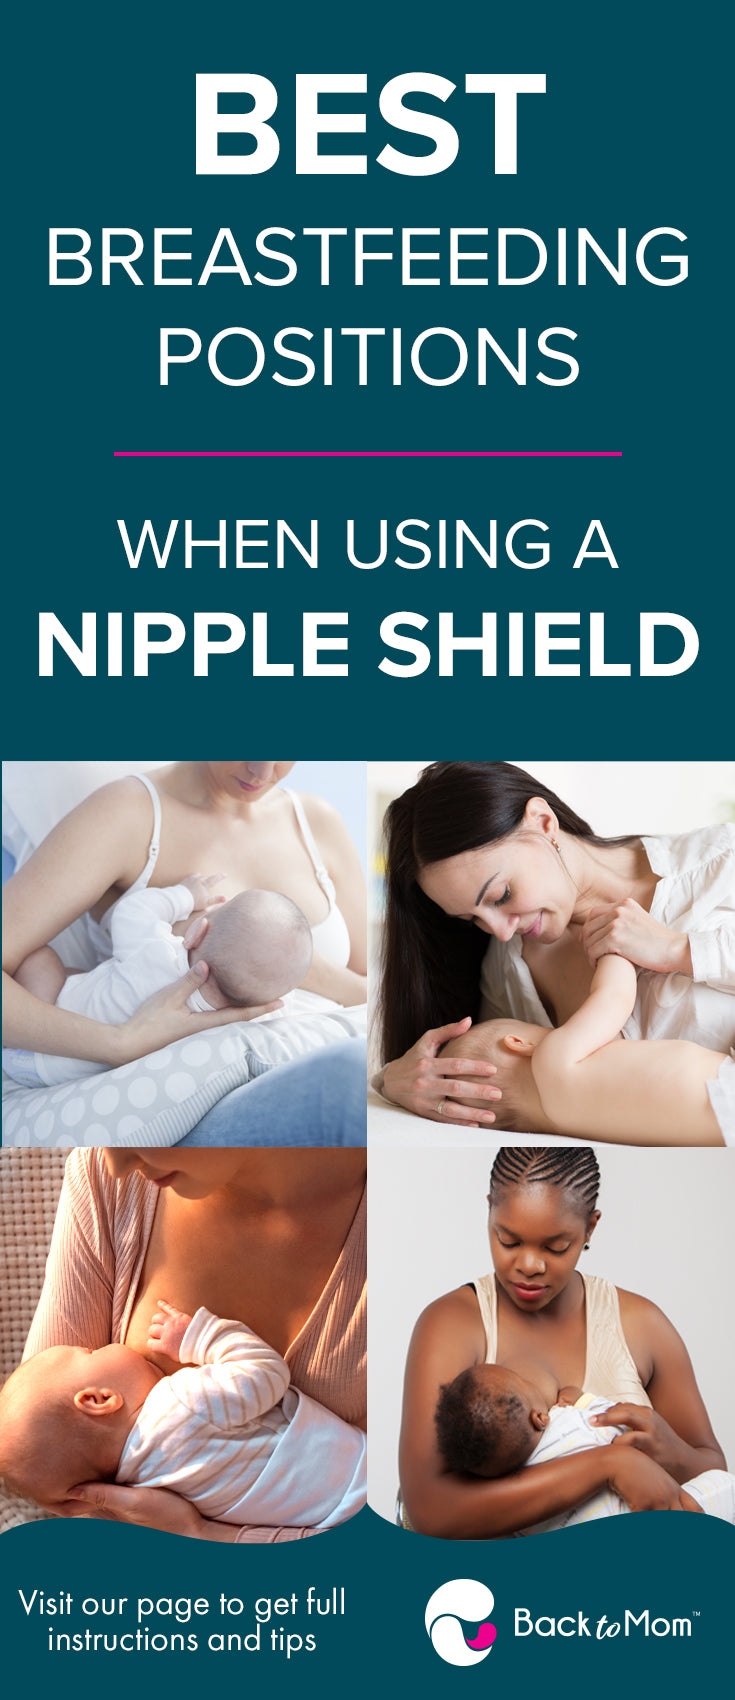 Best positions for breastfeeding with a nipple shield. Nipple shields can be tricky so it's hard to find the right position. 